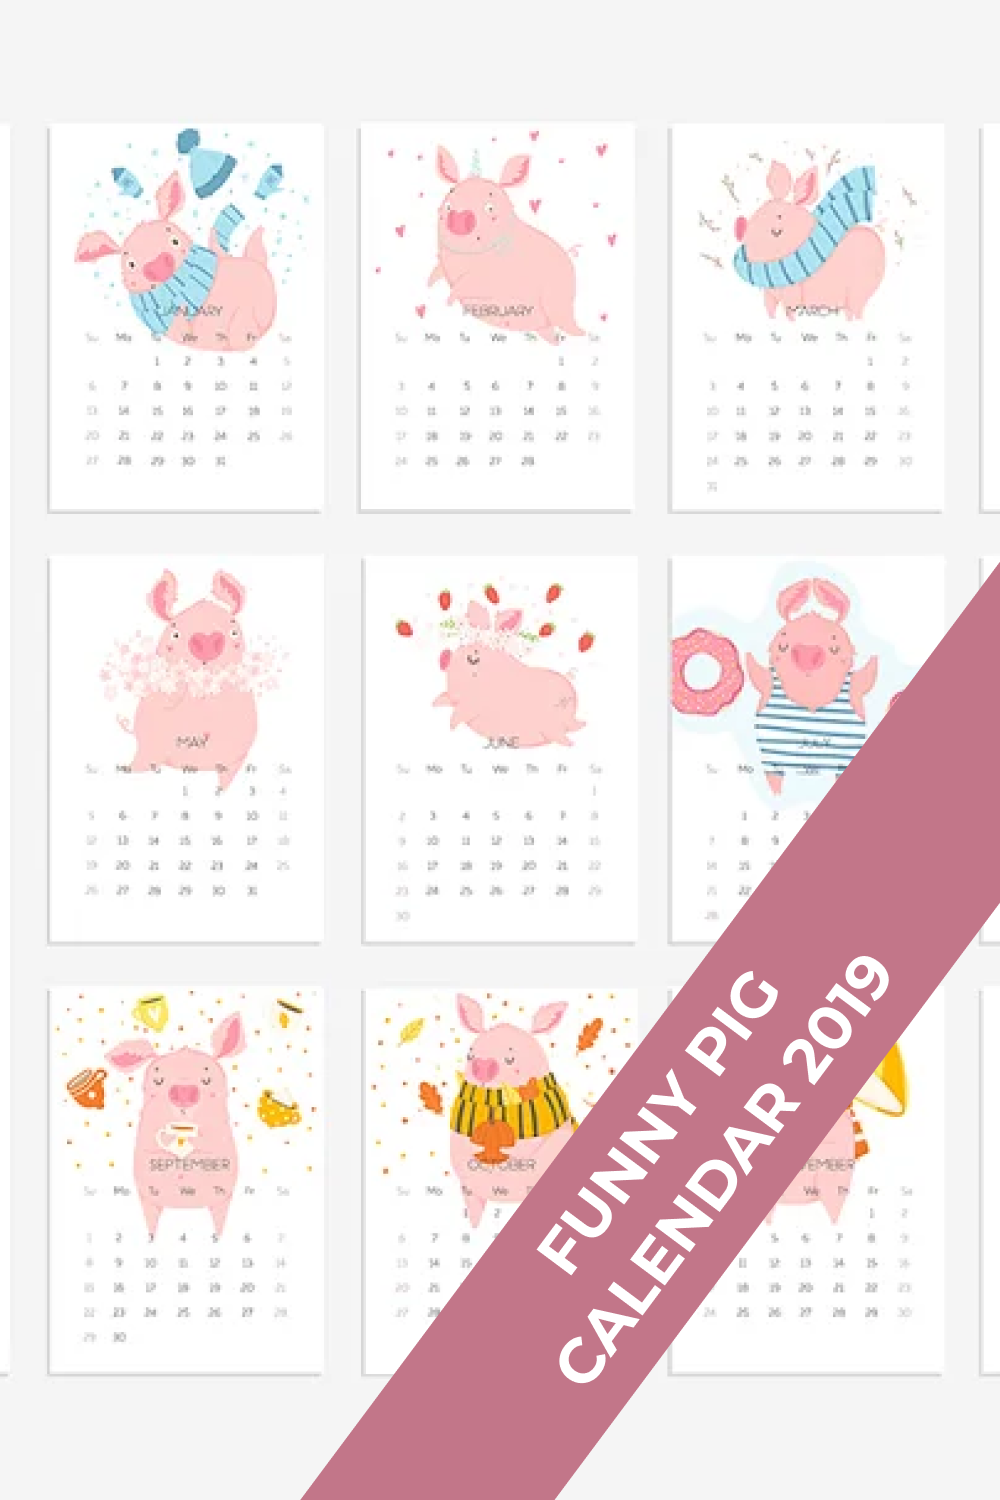 Cheerful piglets on the calendar.